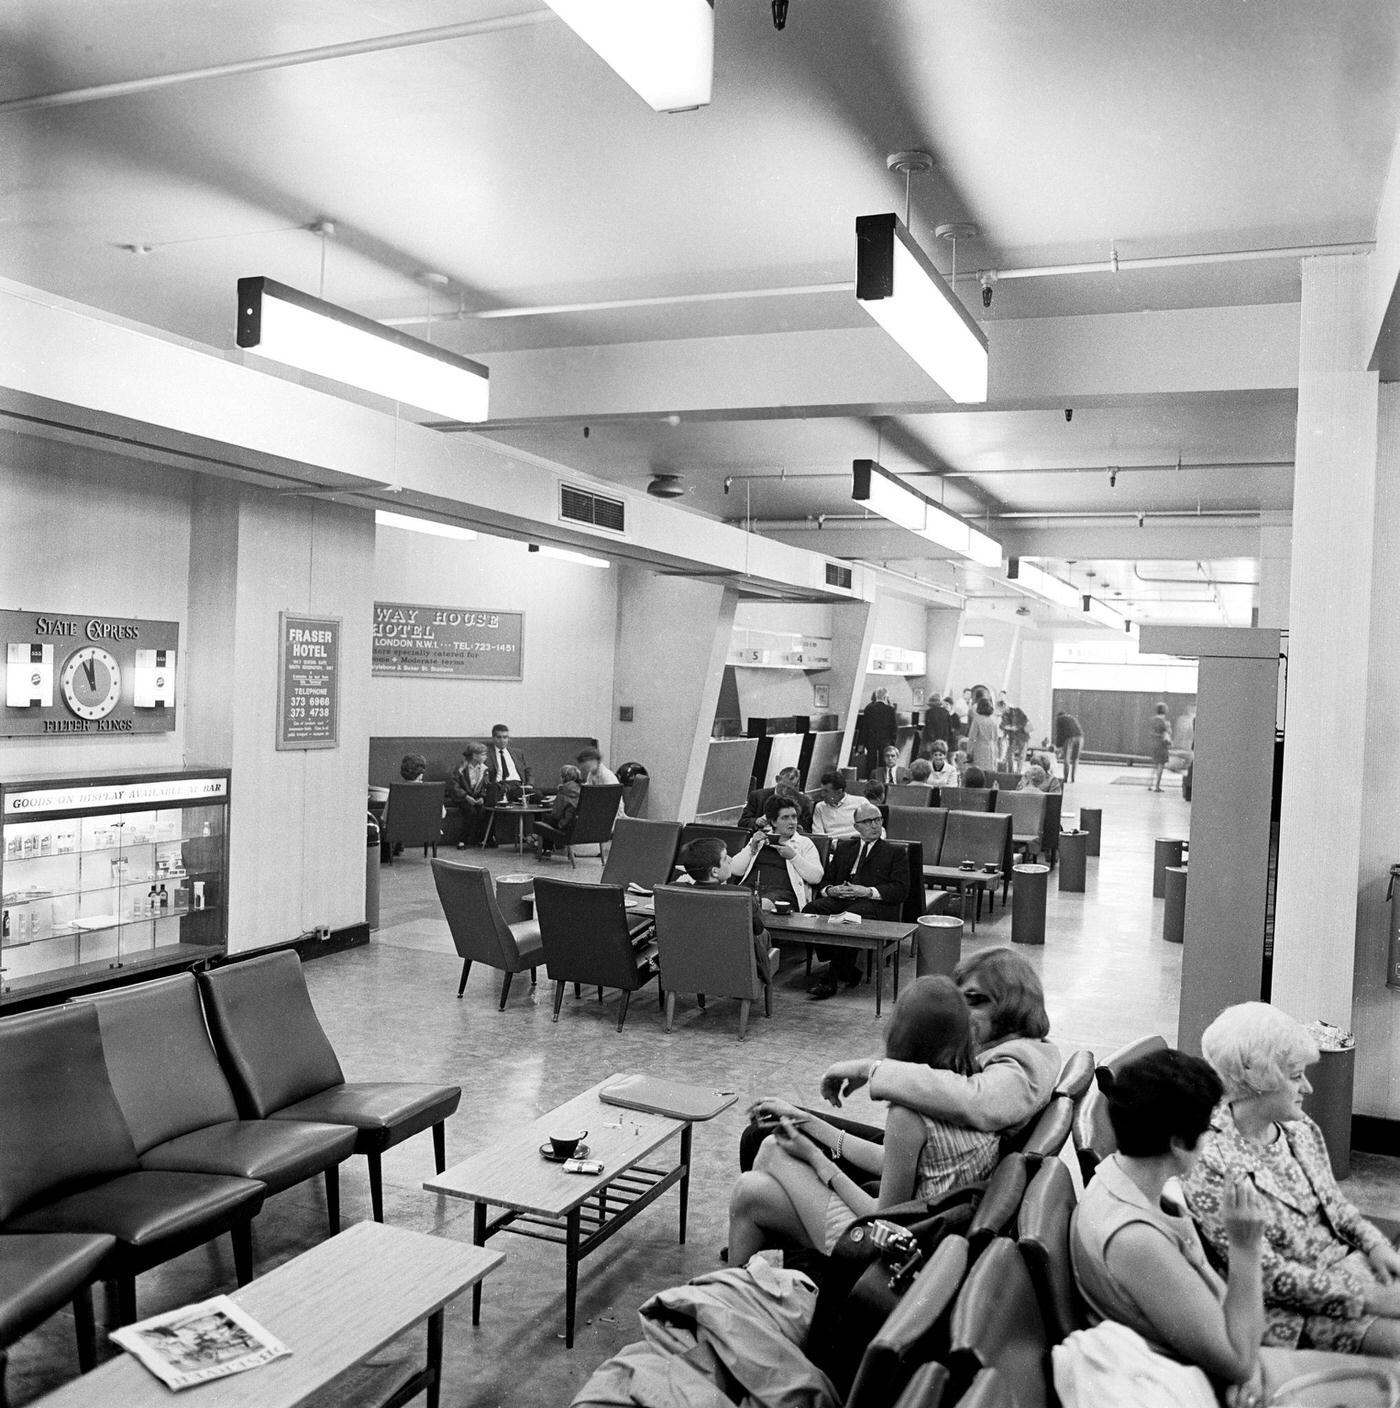 Passengers sitting in a waiting area of the British Eagle International Airlines terminal at Knightsbridge Air Terminal, London, 1960